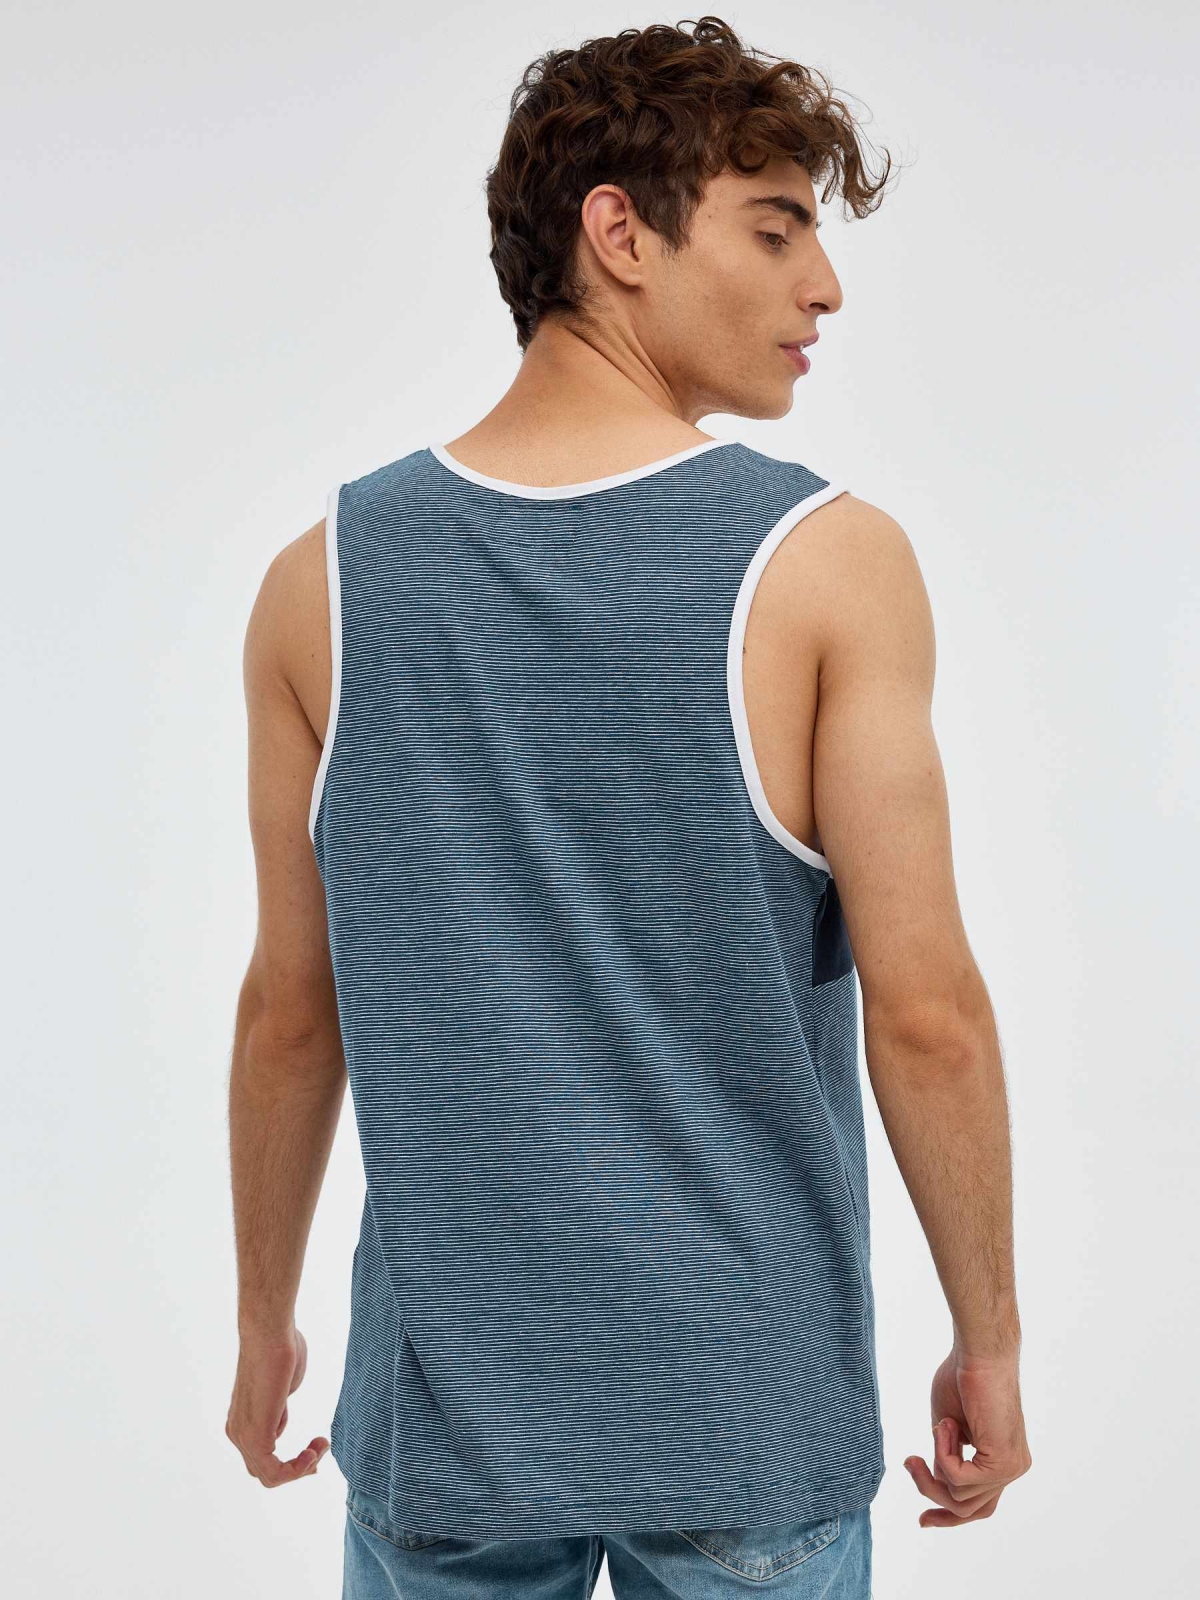 AFTW tank top blue middle back view